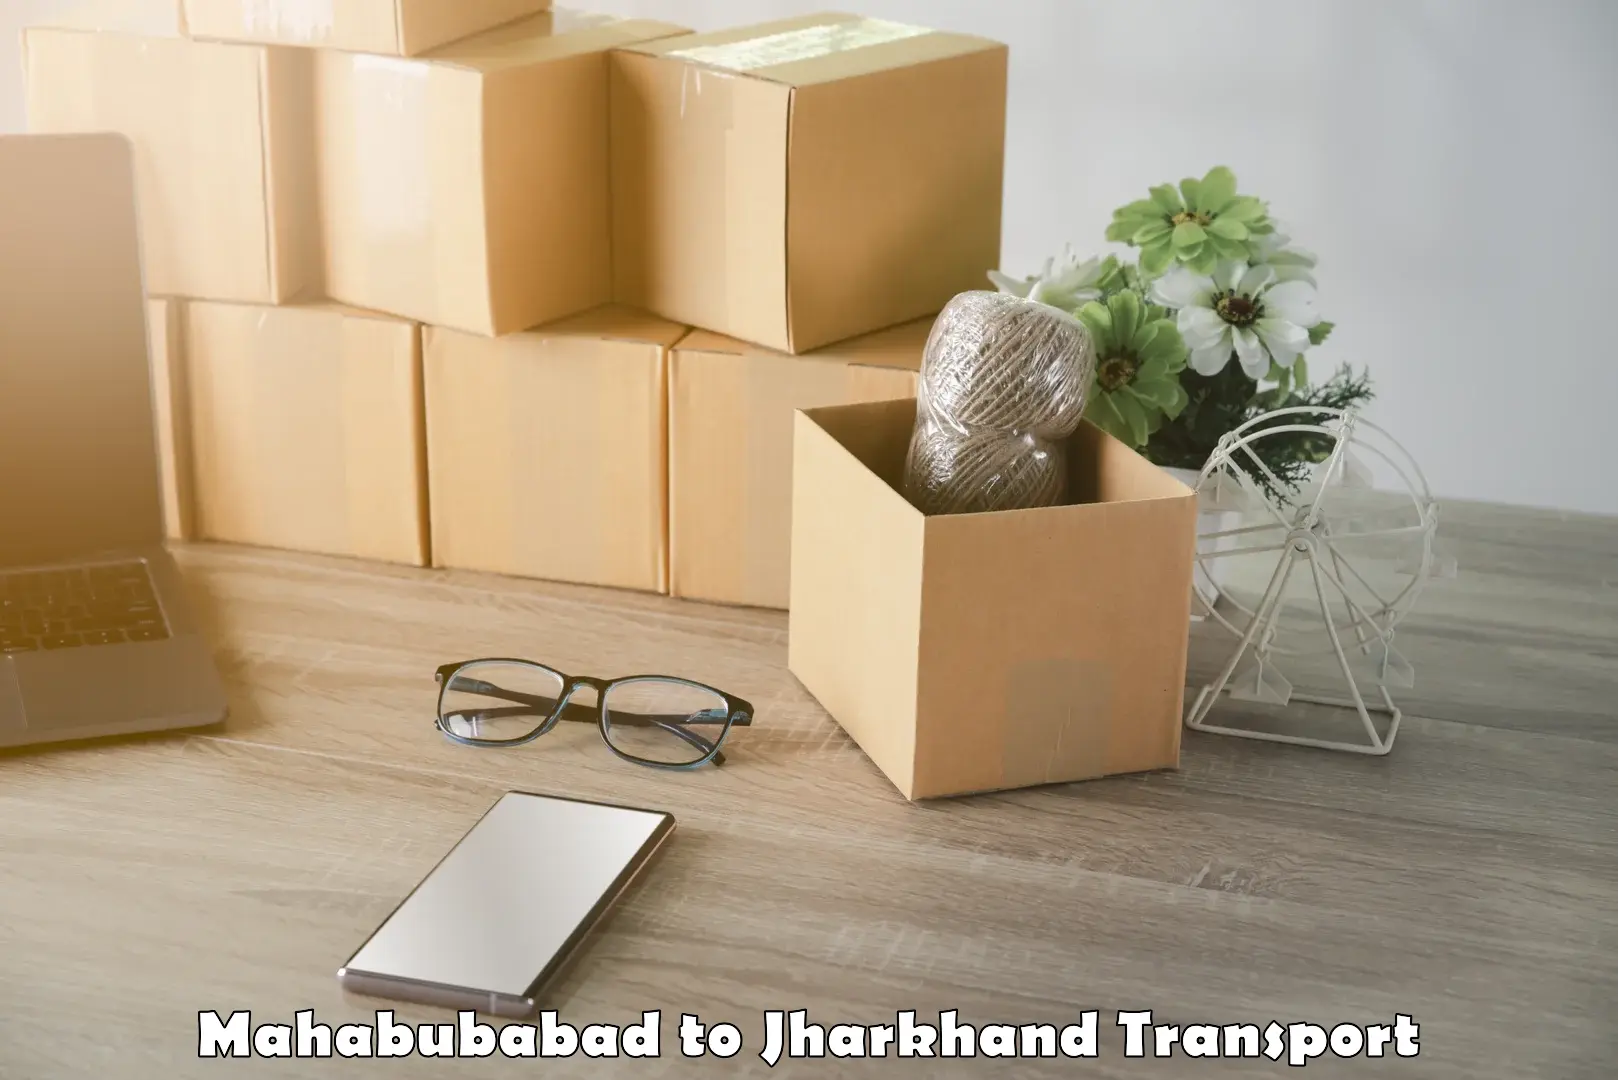 Truck transport companies in India Mahabubabad to Chandil